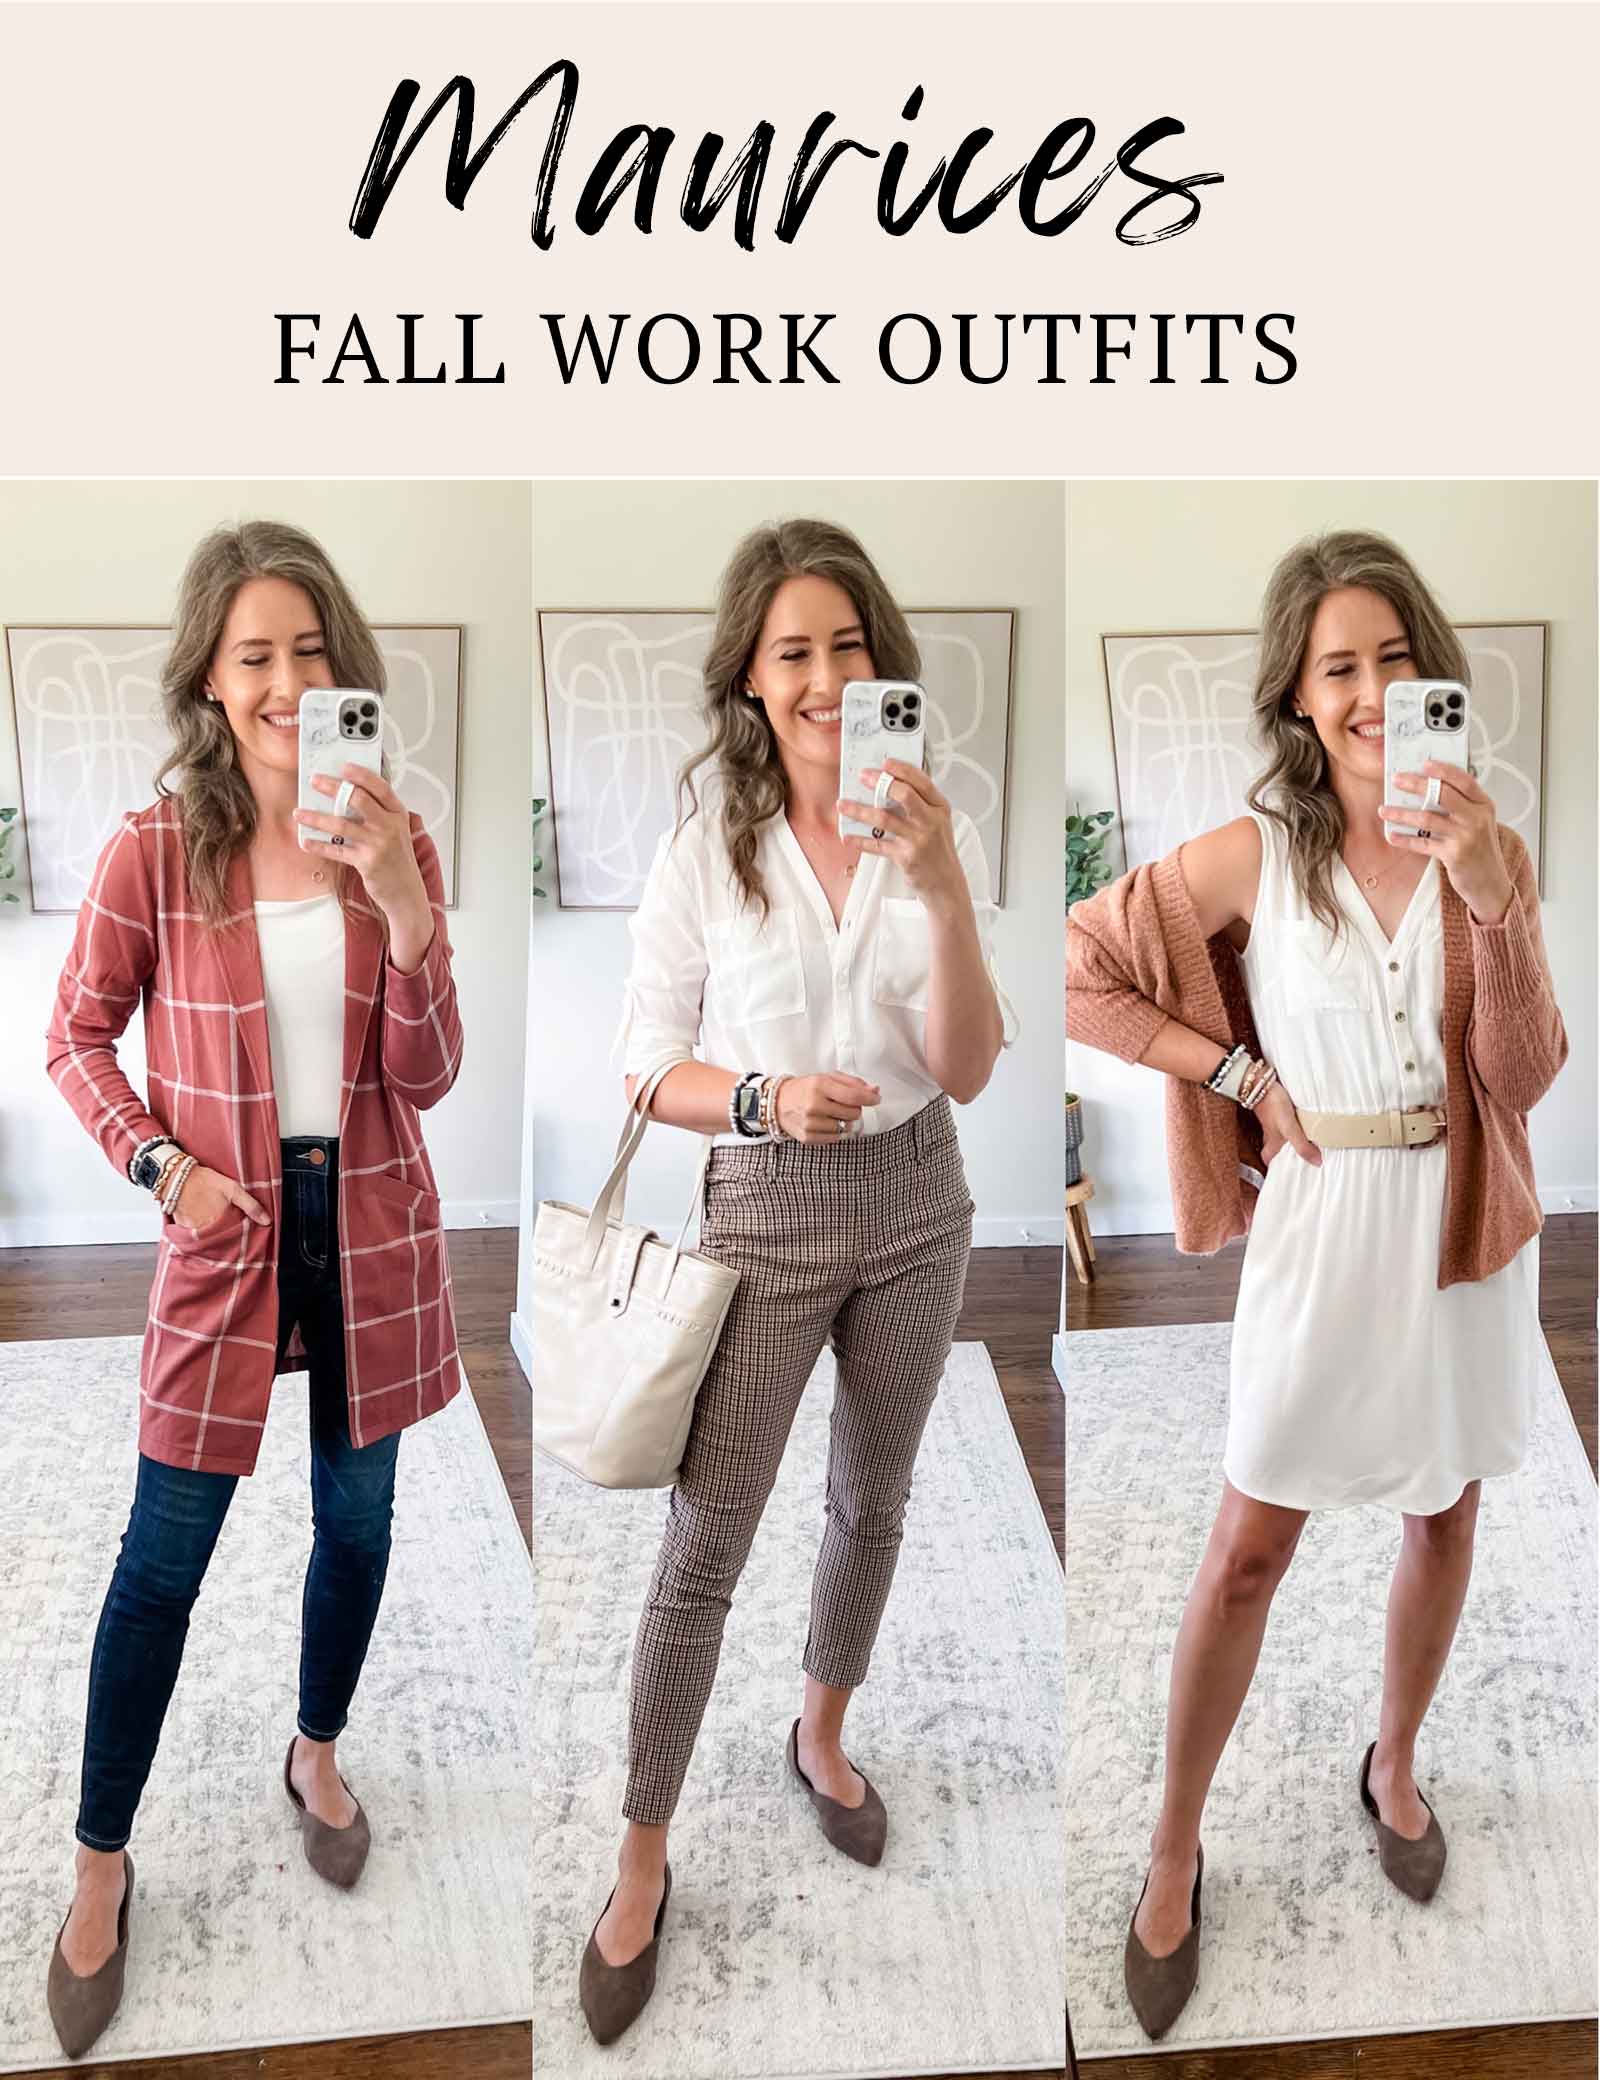 Maurices casual fall work outfit ideas (sponsored)